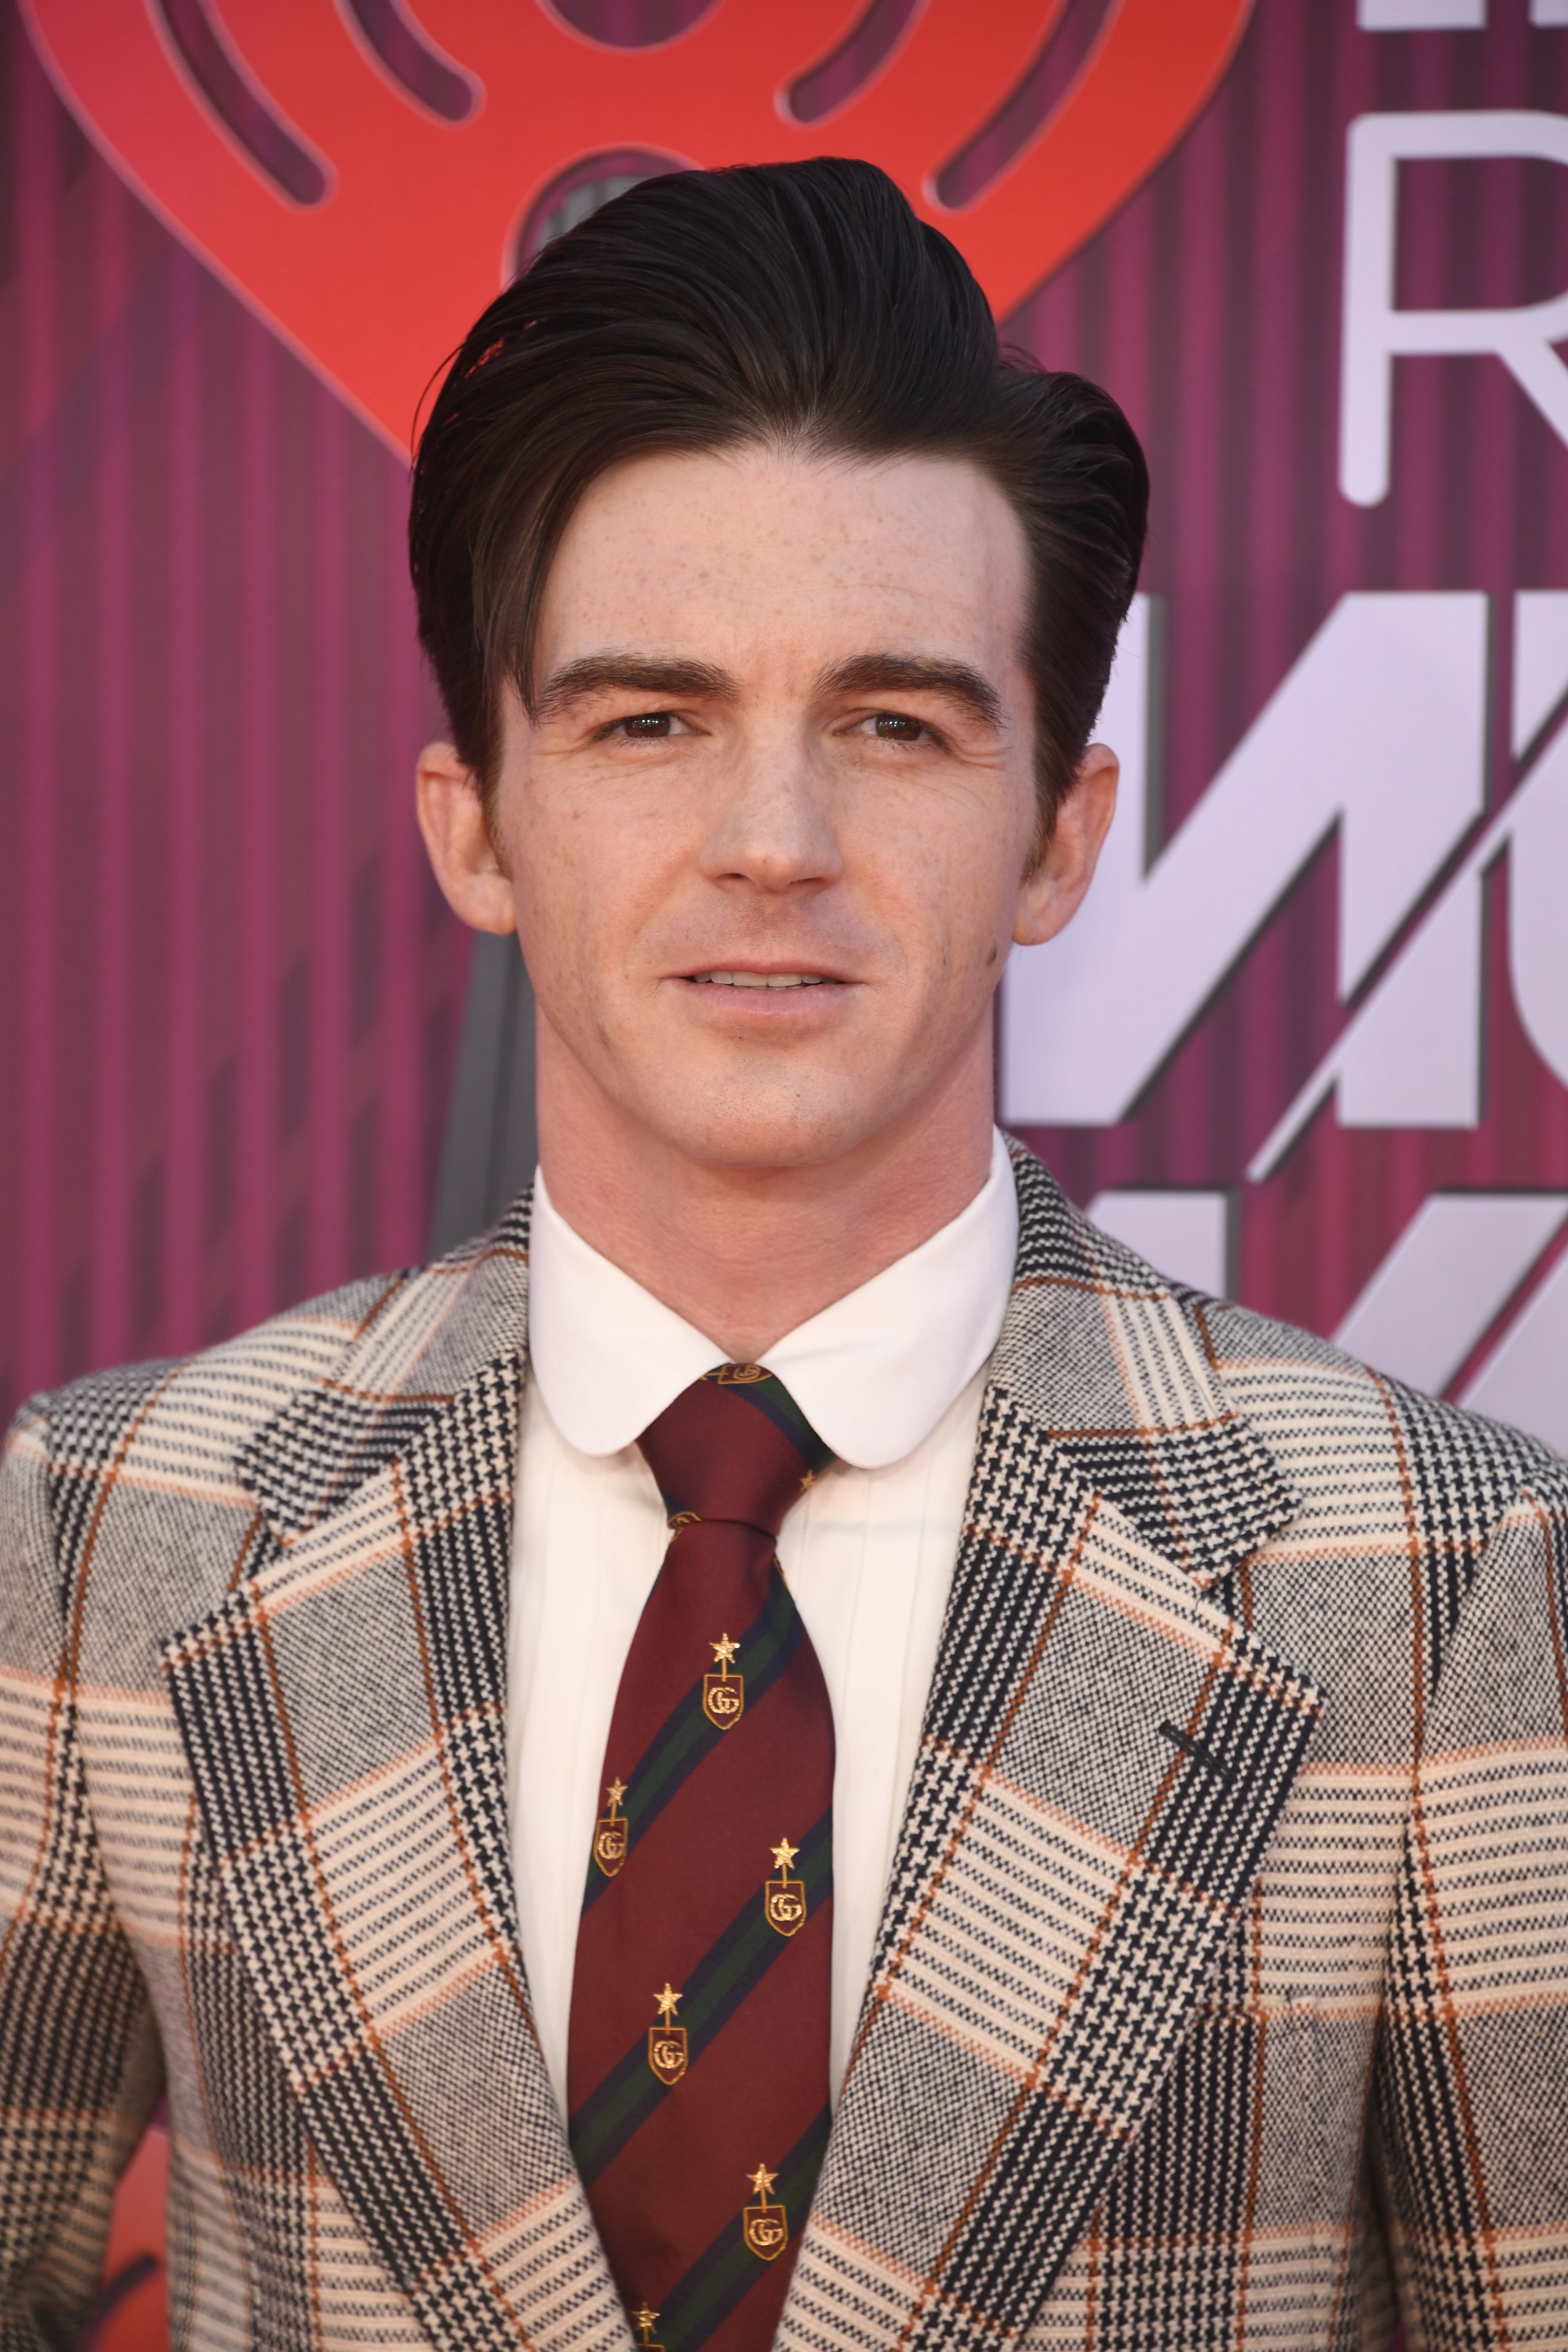 Drake in a plaid suit with a tie, posing at an event